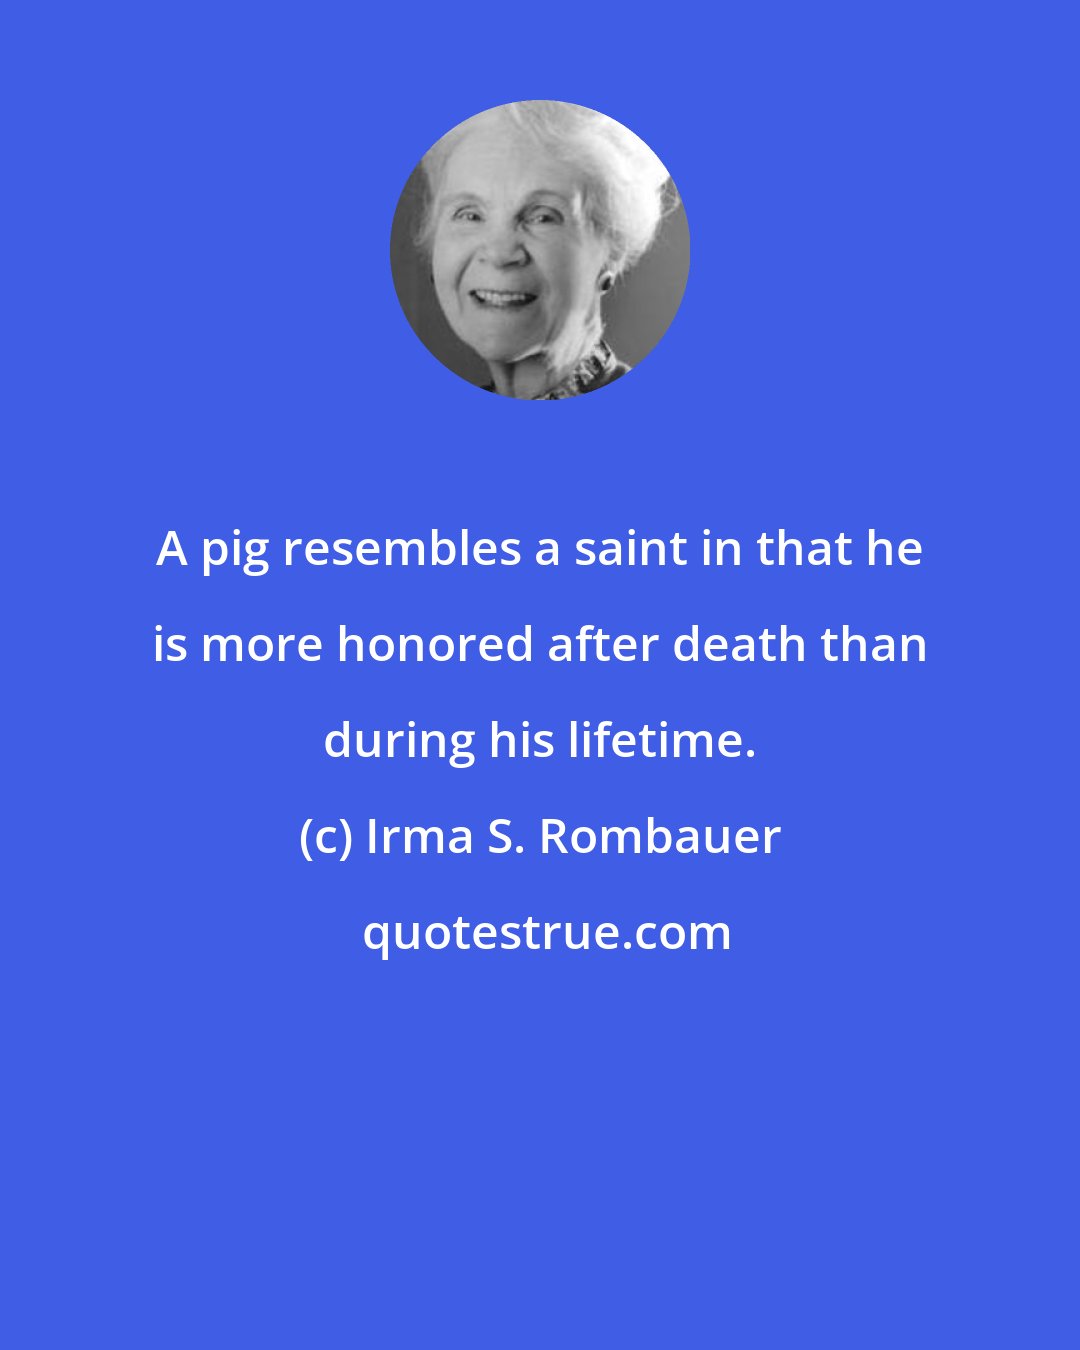 Irma S. Rombauer: A pig resembles a saint in that he is more honored after death than during his lifetime.